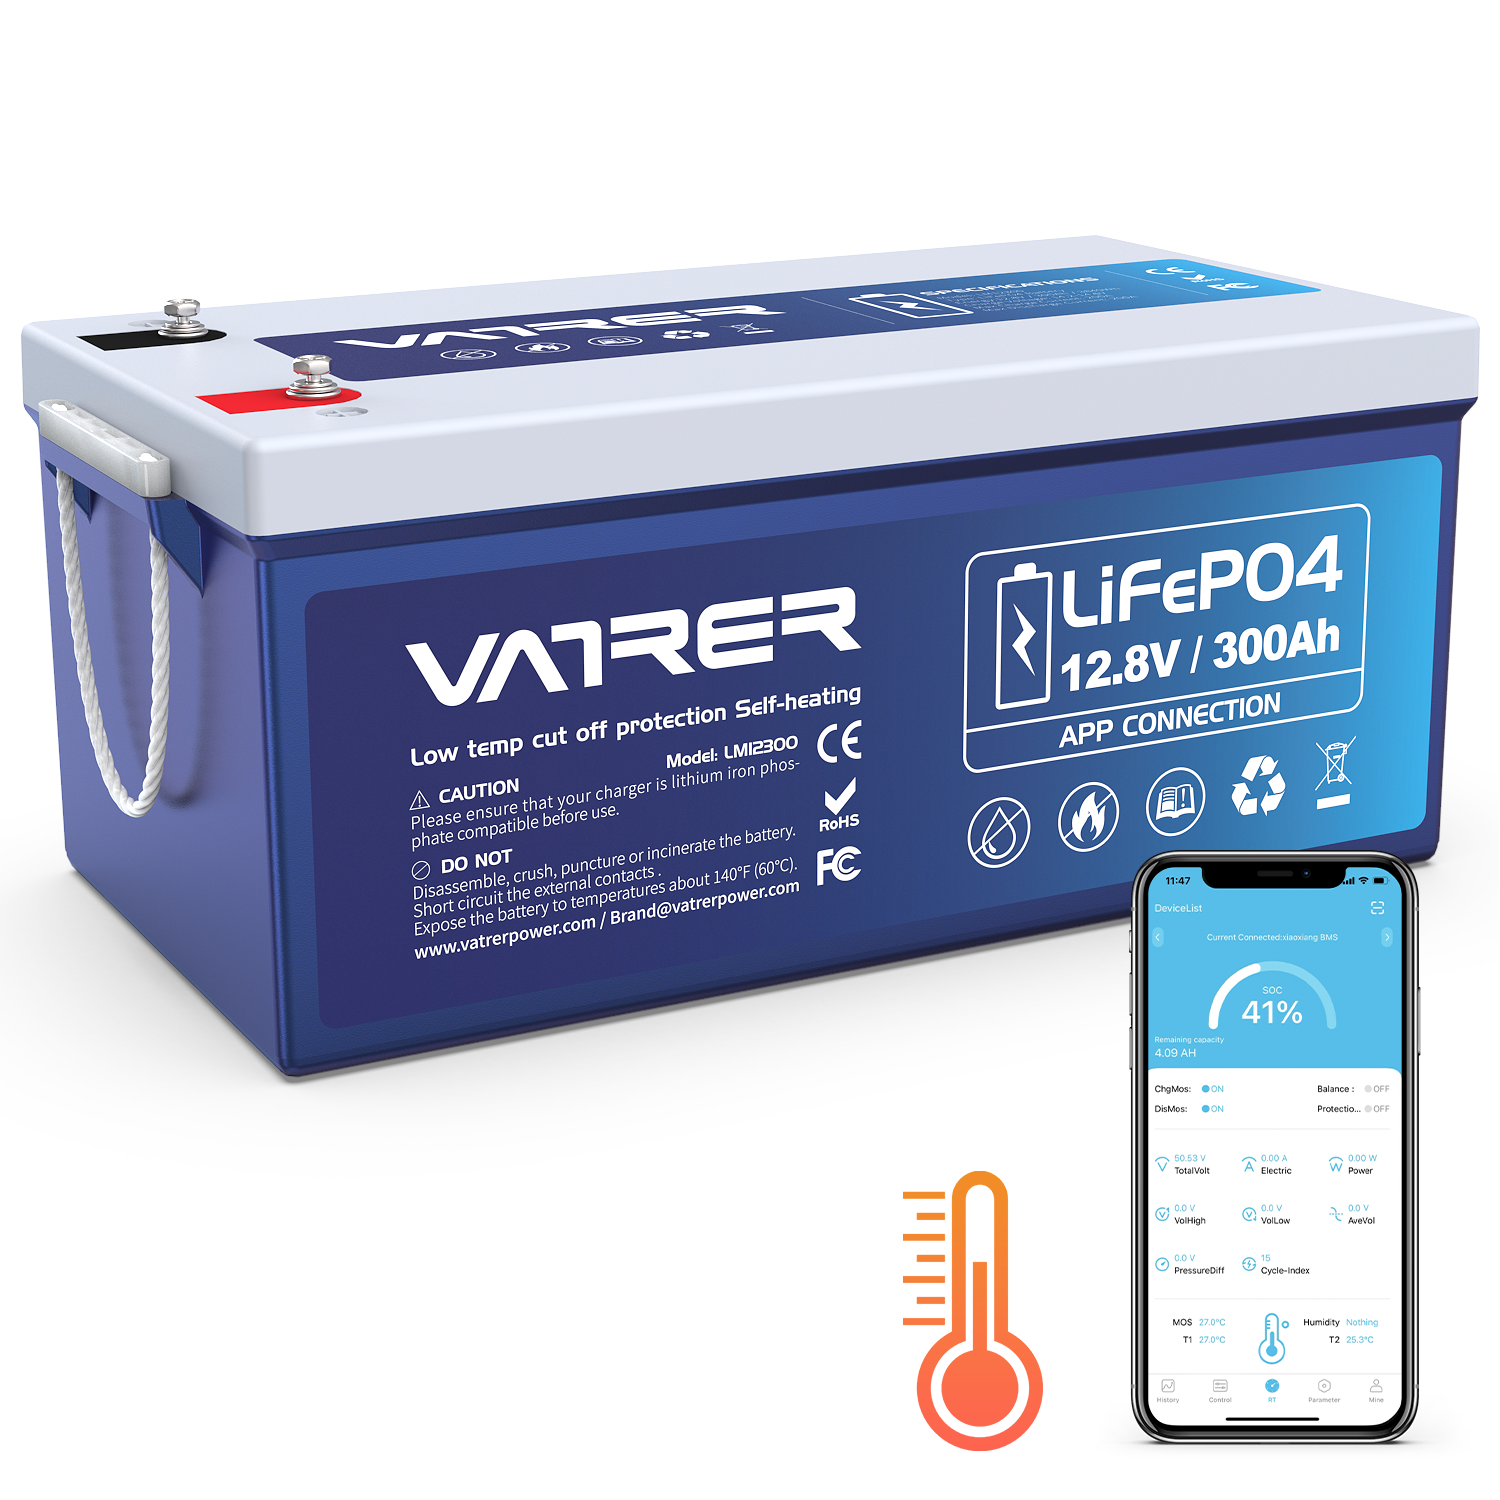 Vatrer 12V 300AH Bluetooth LiFePO4 Lithium Battery with Self-Heating, 200A  BMS, Supports Low Temp Charging(-4°F), 5000+ Cycles, 2560W Power